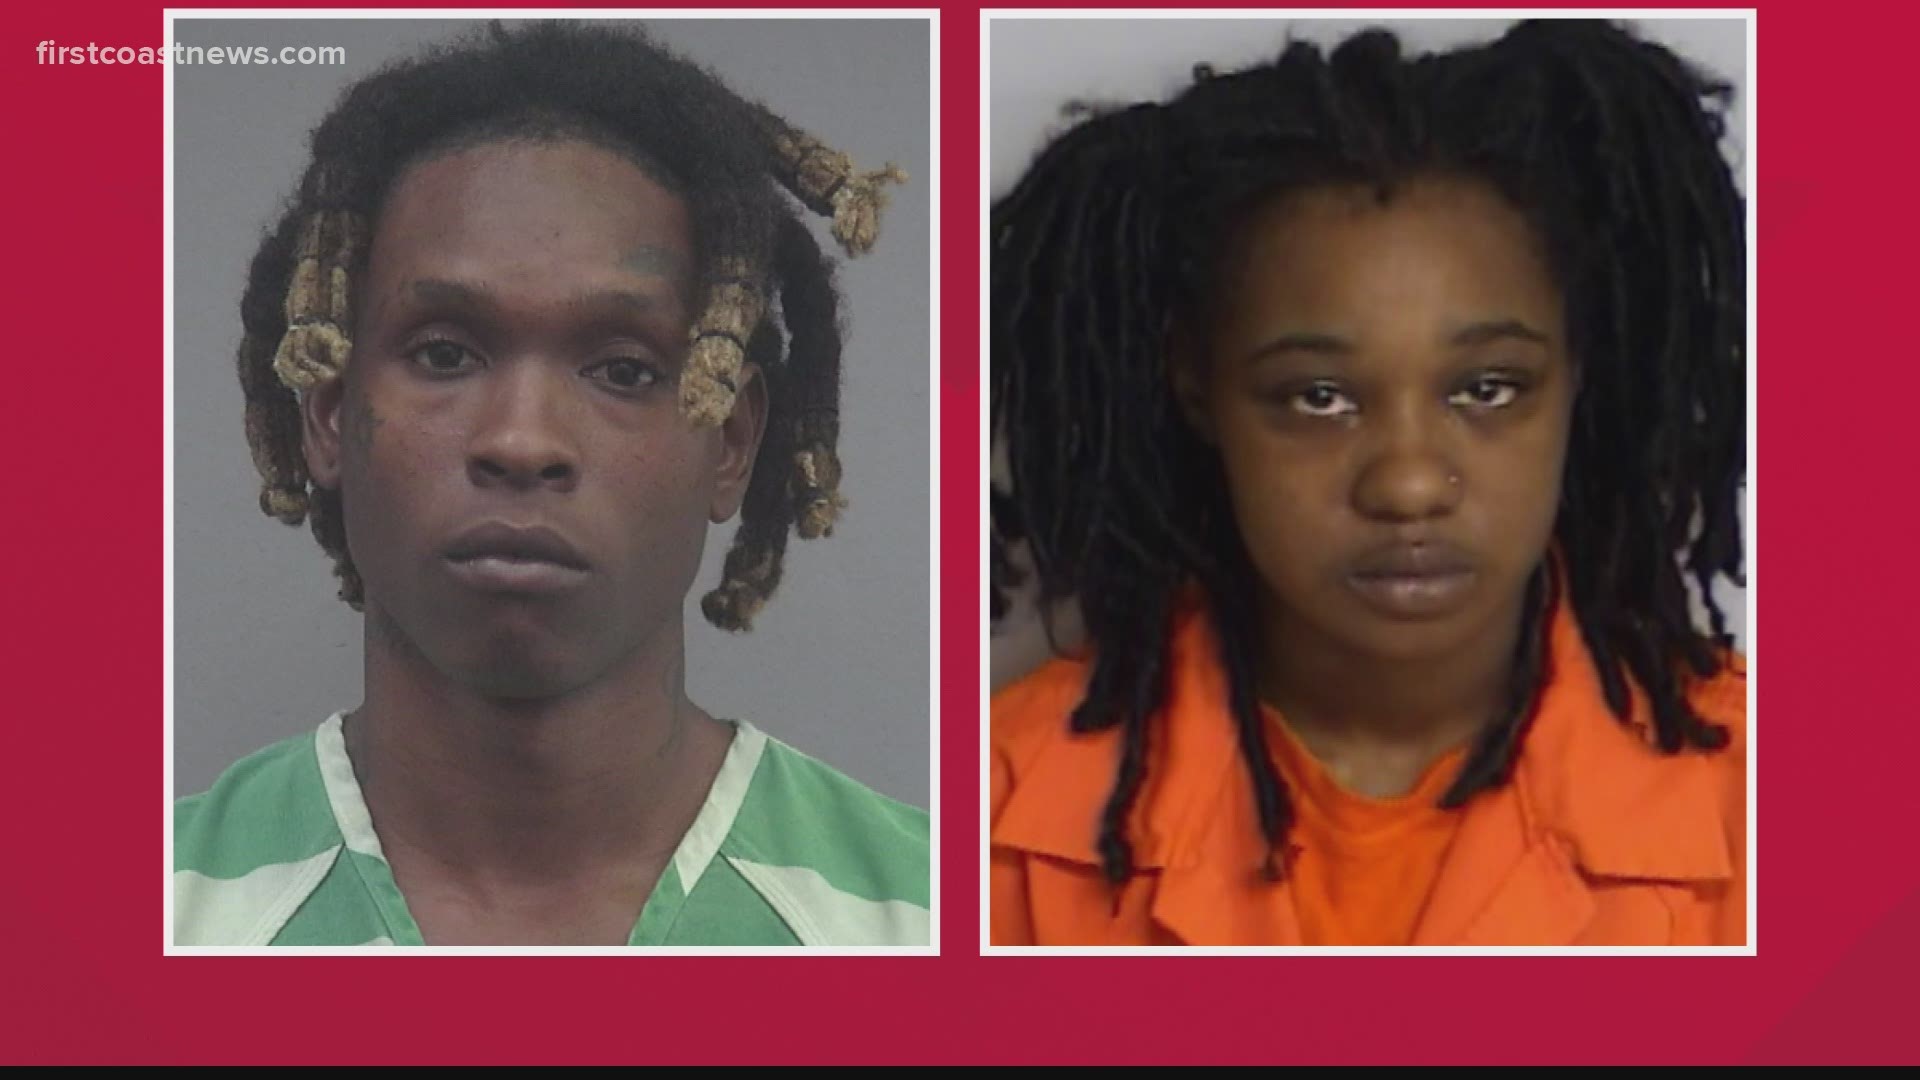 The Starke Police Department said D'Lana King and J'Shawn Murrah are facing aggravated child neglect after their daughter died of a fentanyl overdose in August.